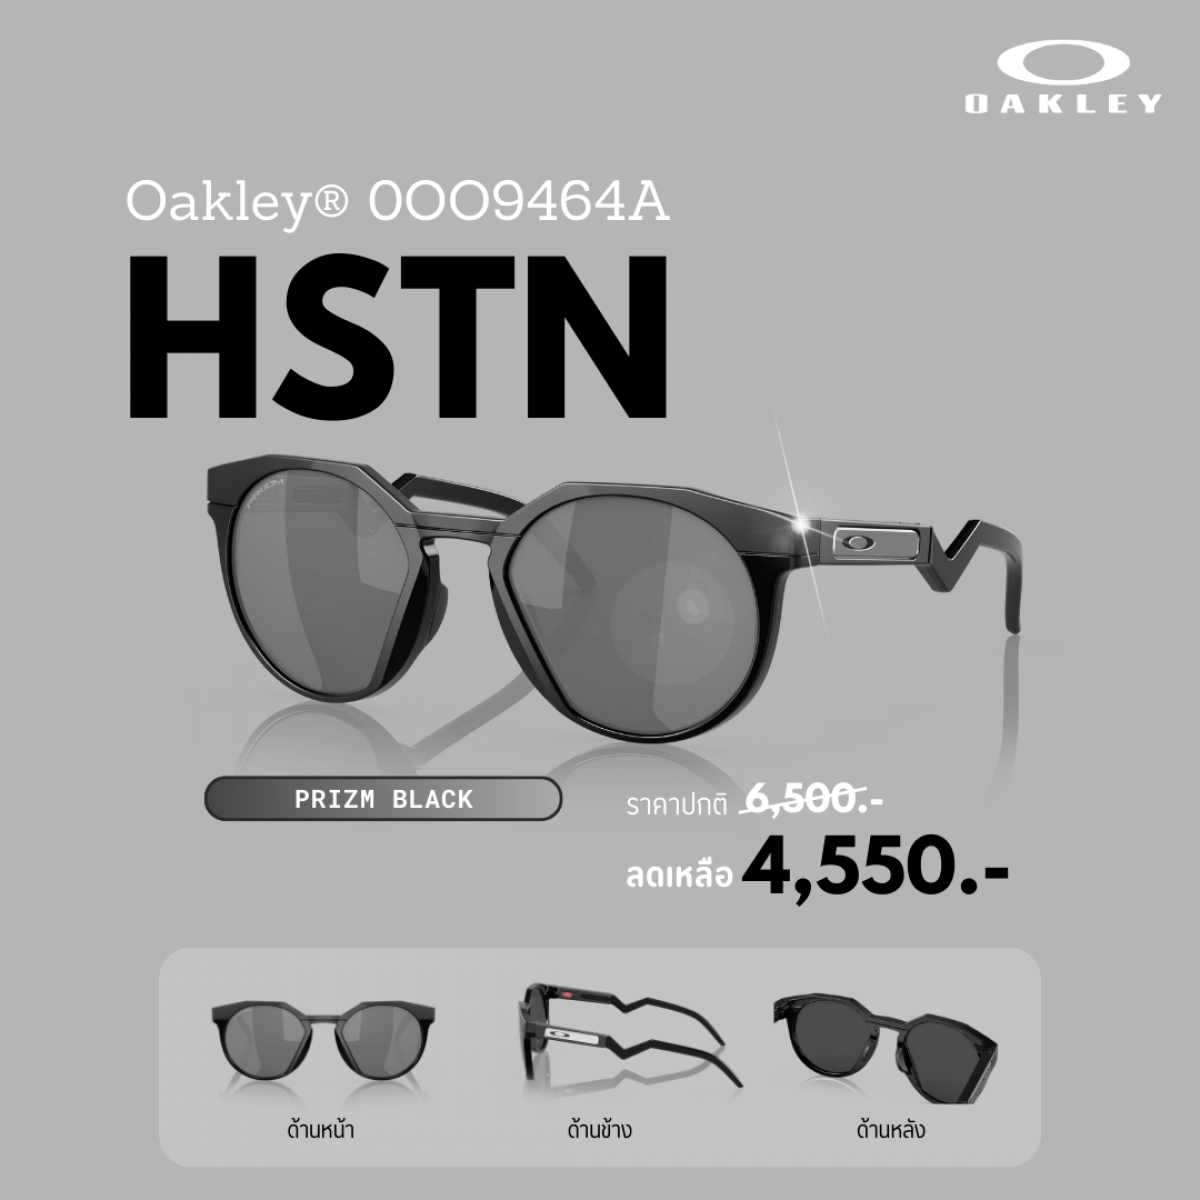 SUNGLASSES_WITH_CASE_0OO9406A_PRIZM_GREY_SIZE_37_(3)